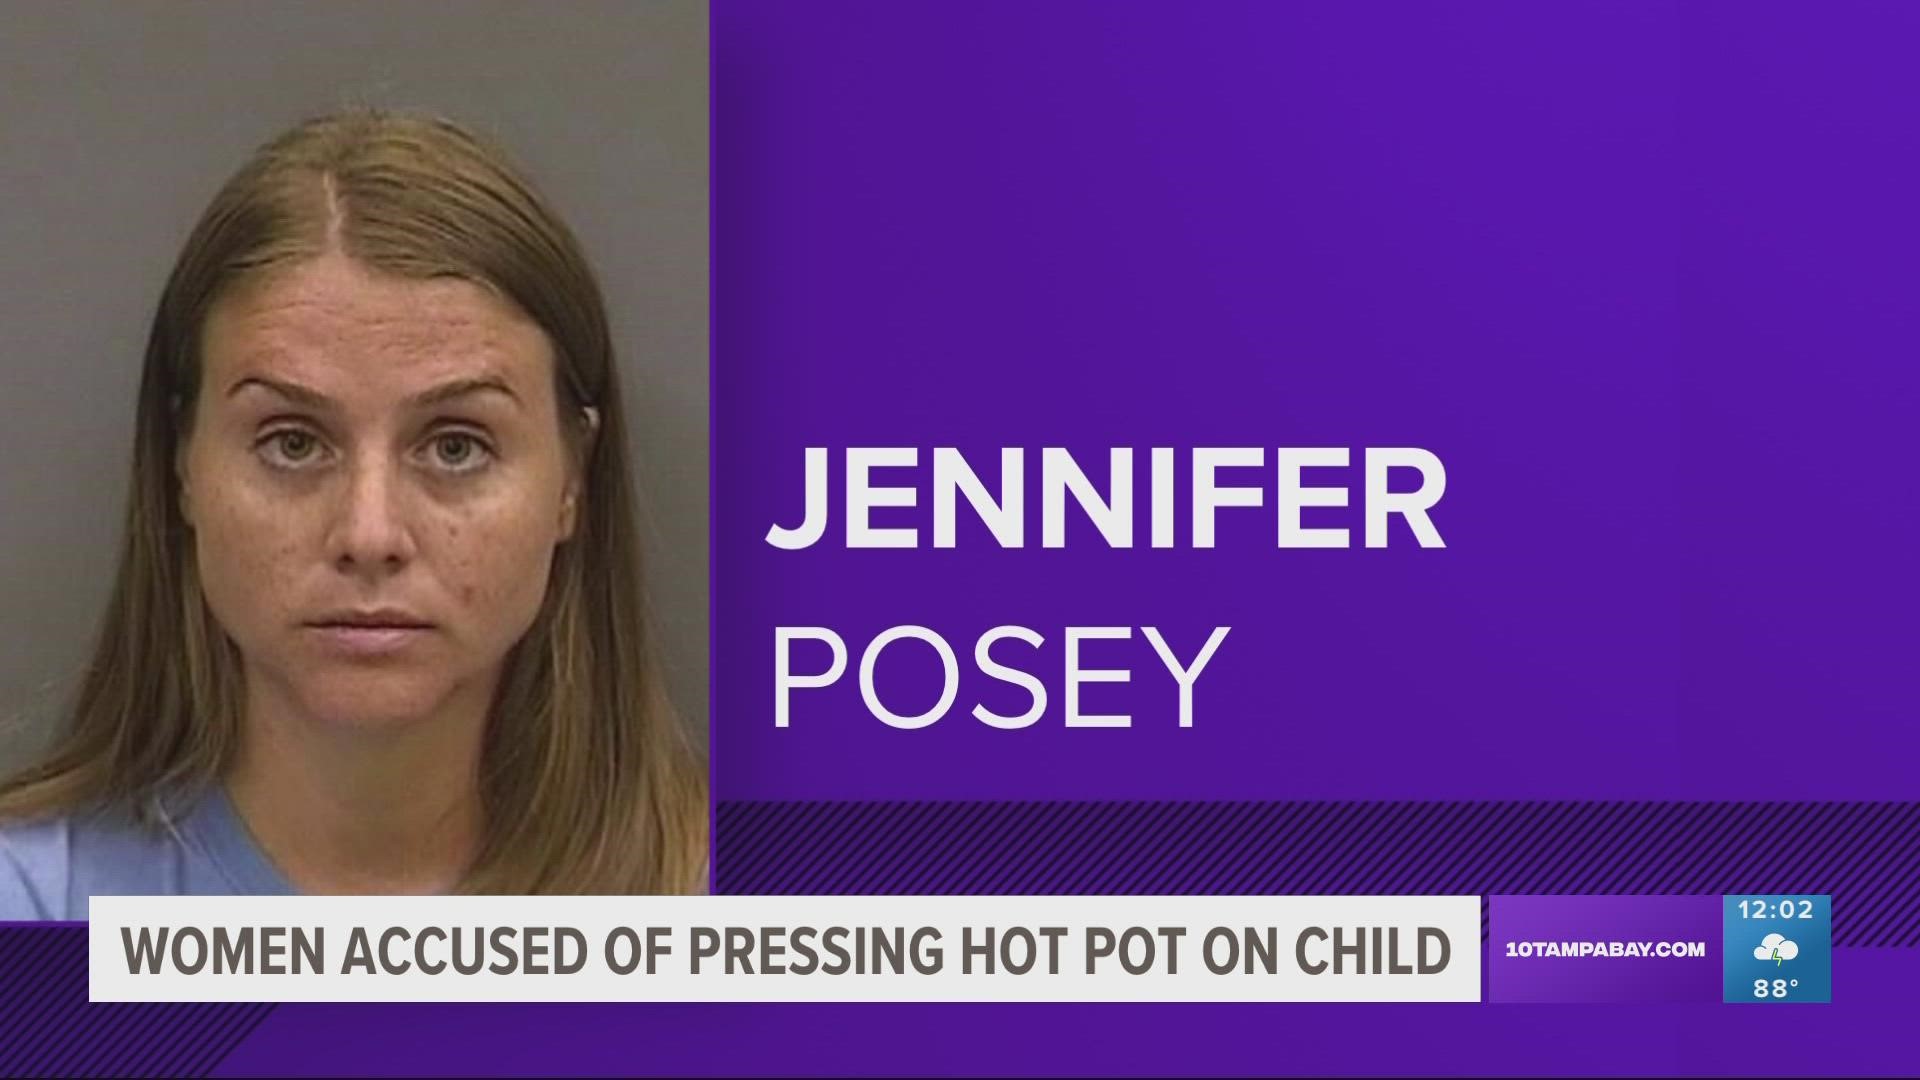 The child suffered a 4-inch burn, the Hillsborough County Sheriff's Office said in a statement.